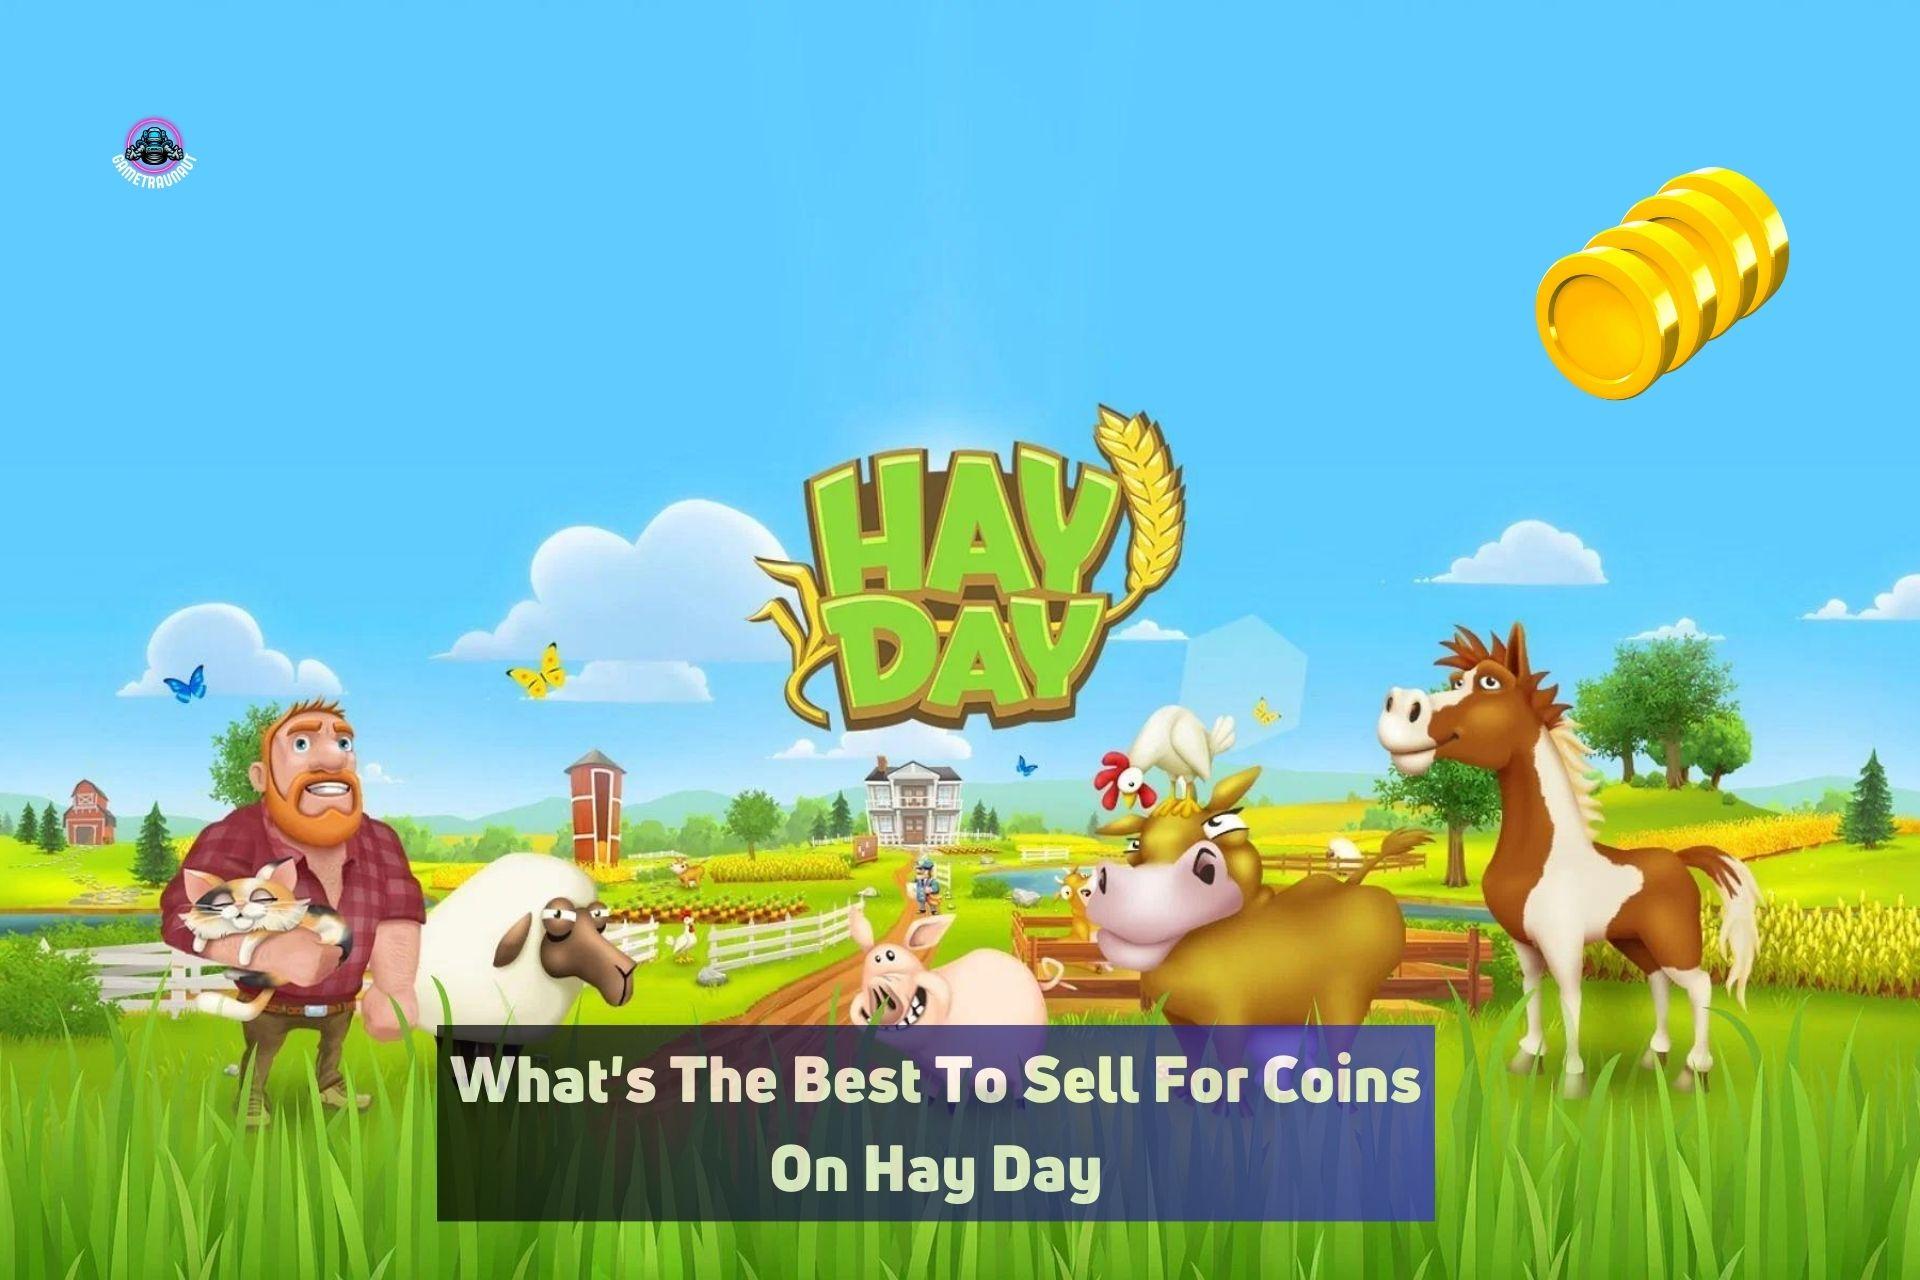 what's the best to sell for coins on hay day